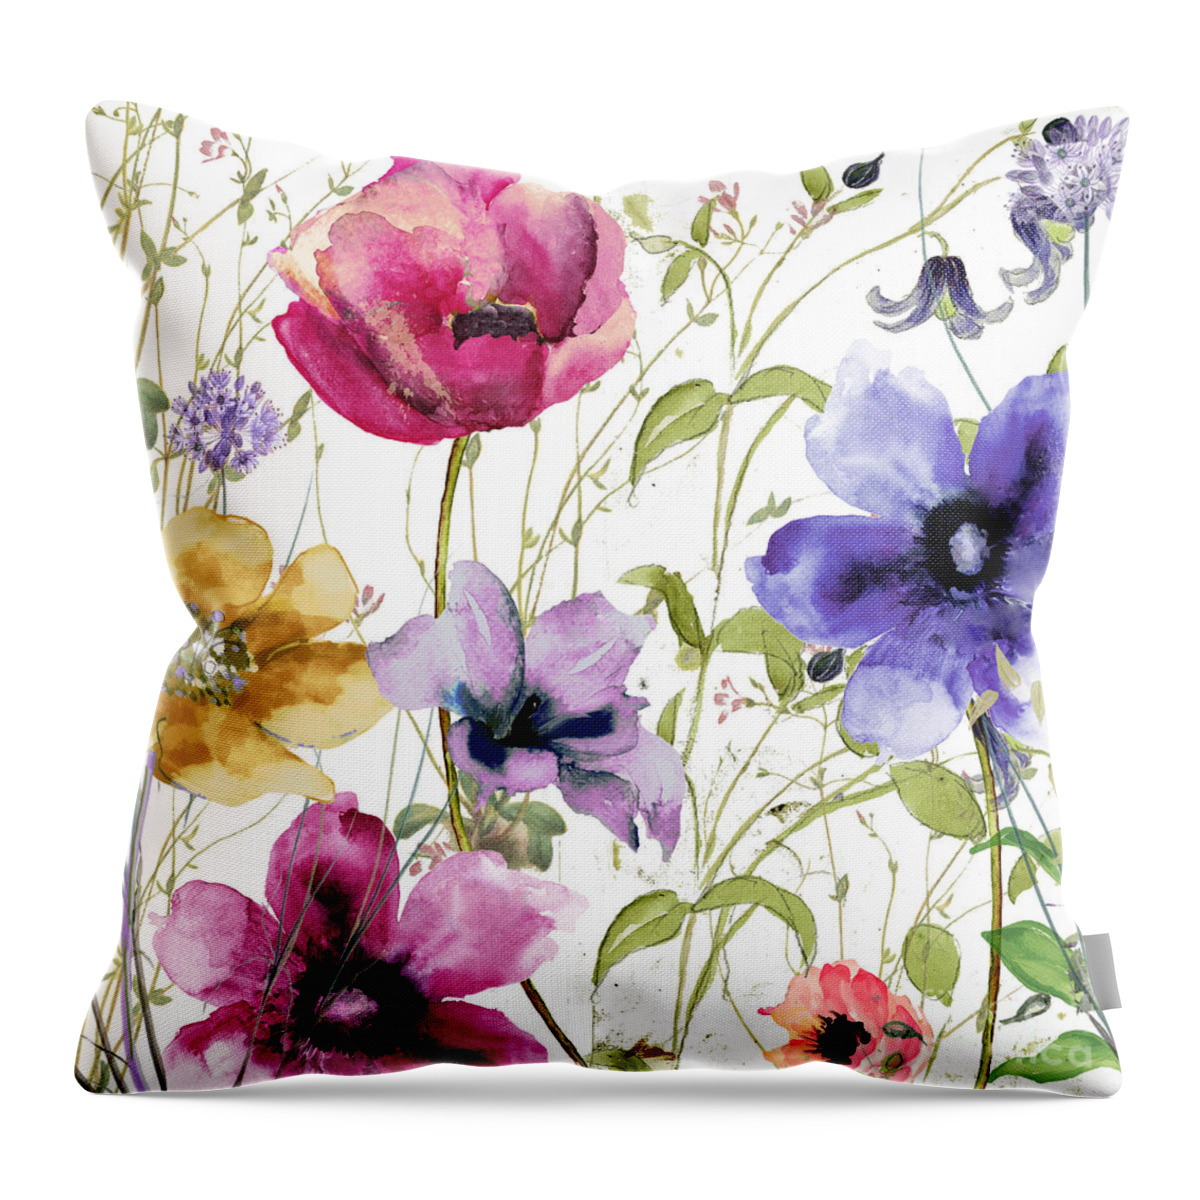 Summer Flowers Throw Pillow featuring the painting Summer Diary I by Mindy Sommers